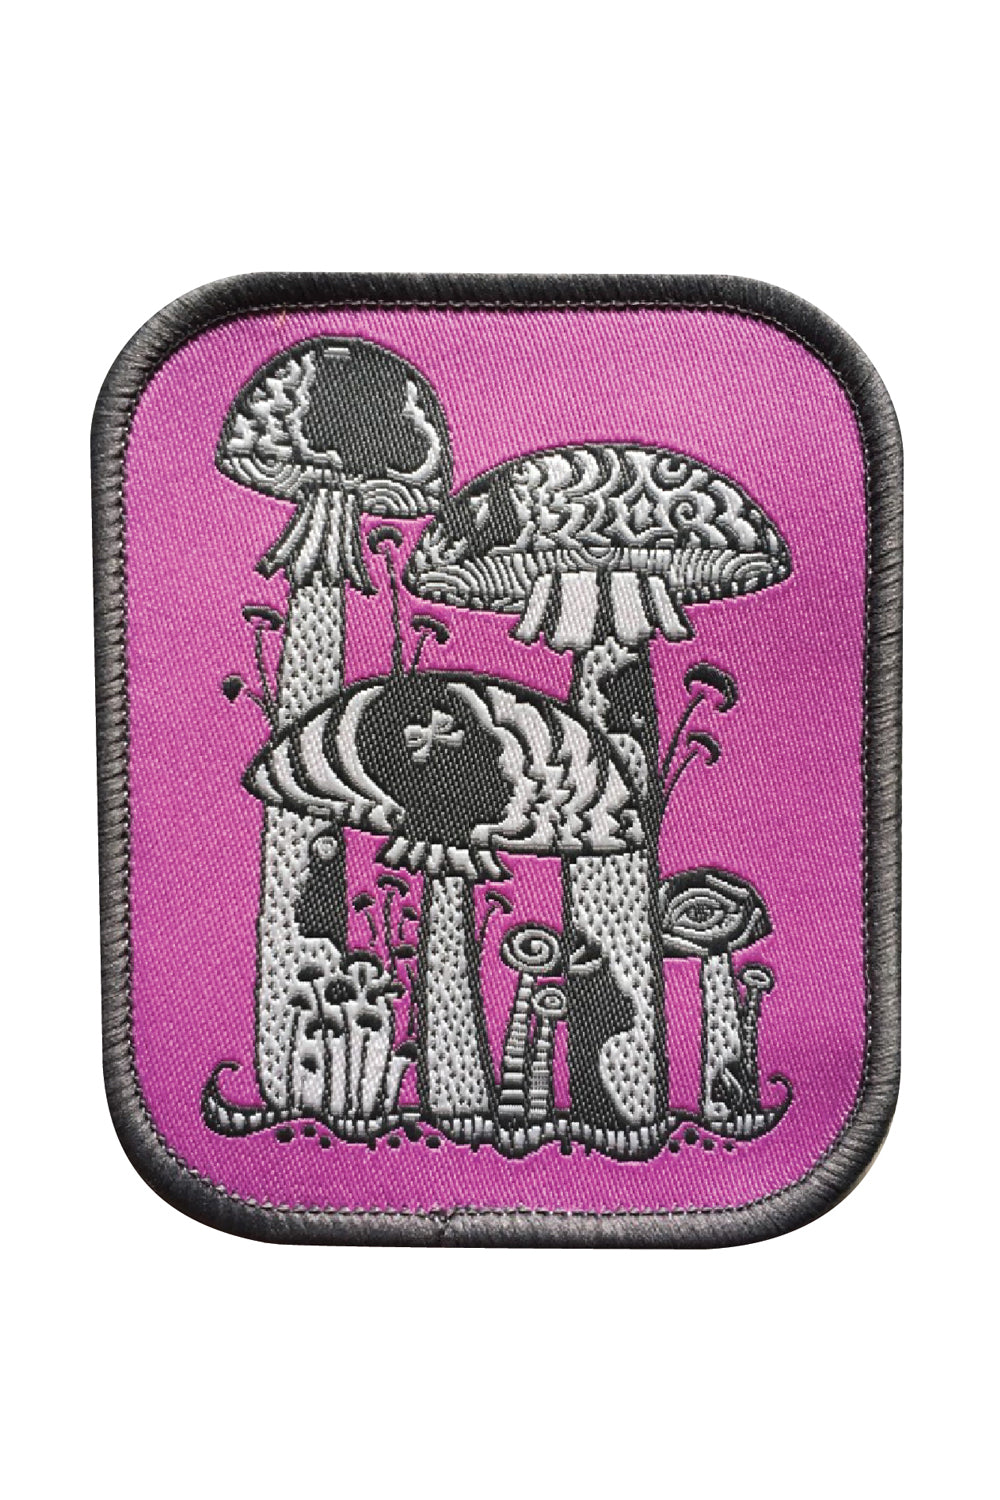 Psychedelic Fungirls Patch in Lilac and Smoke